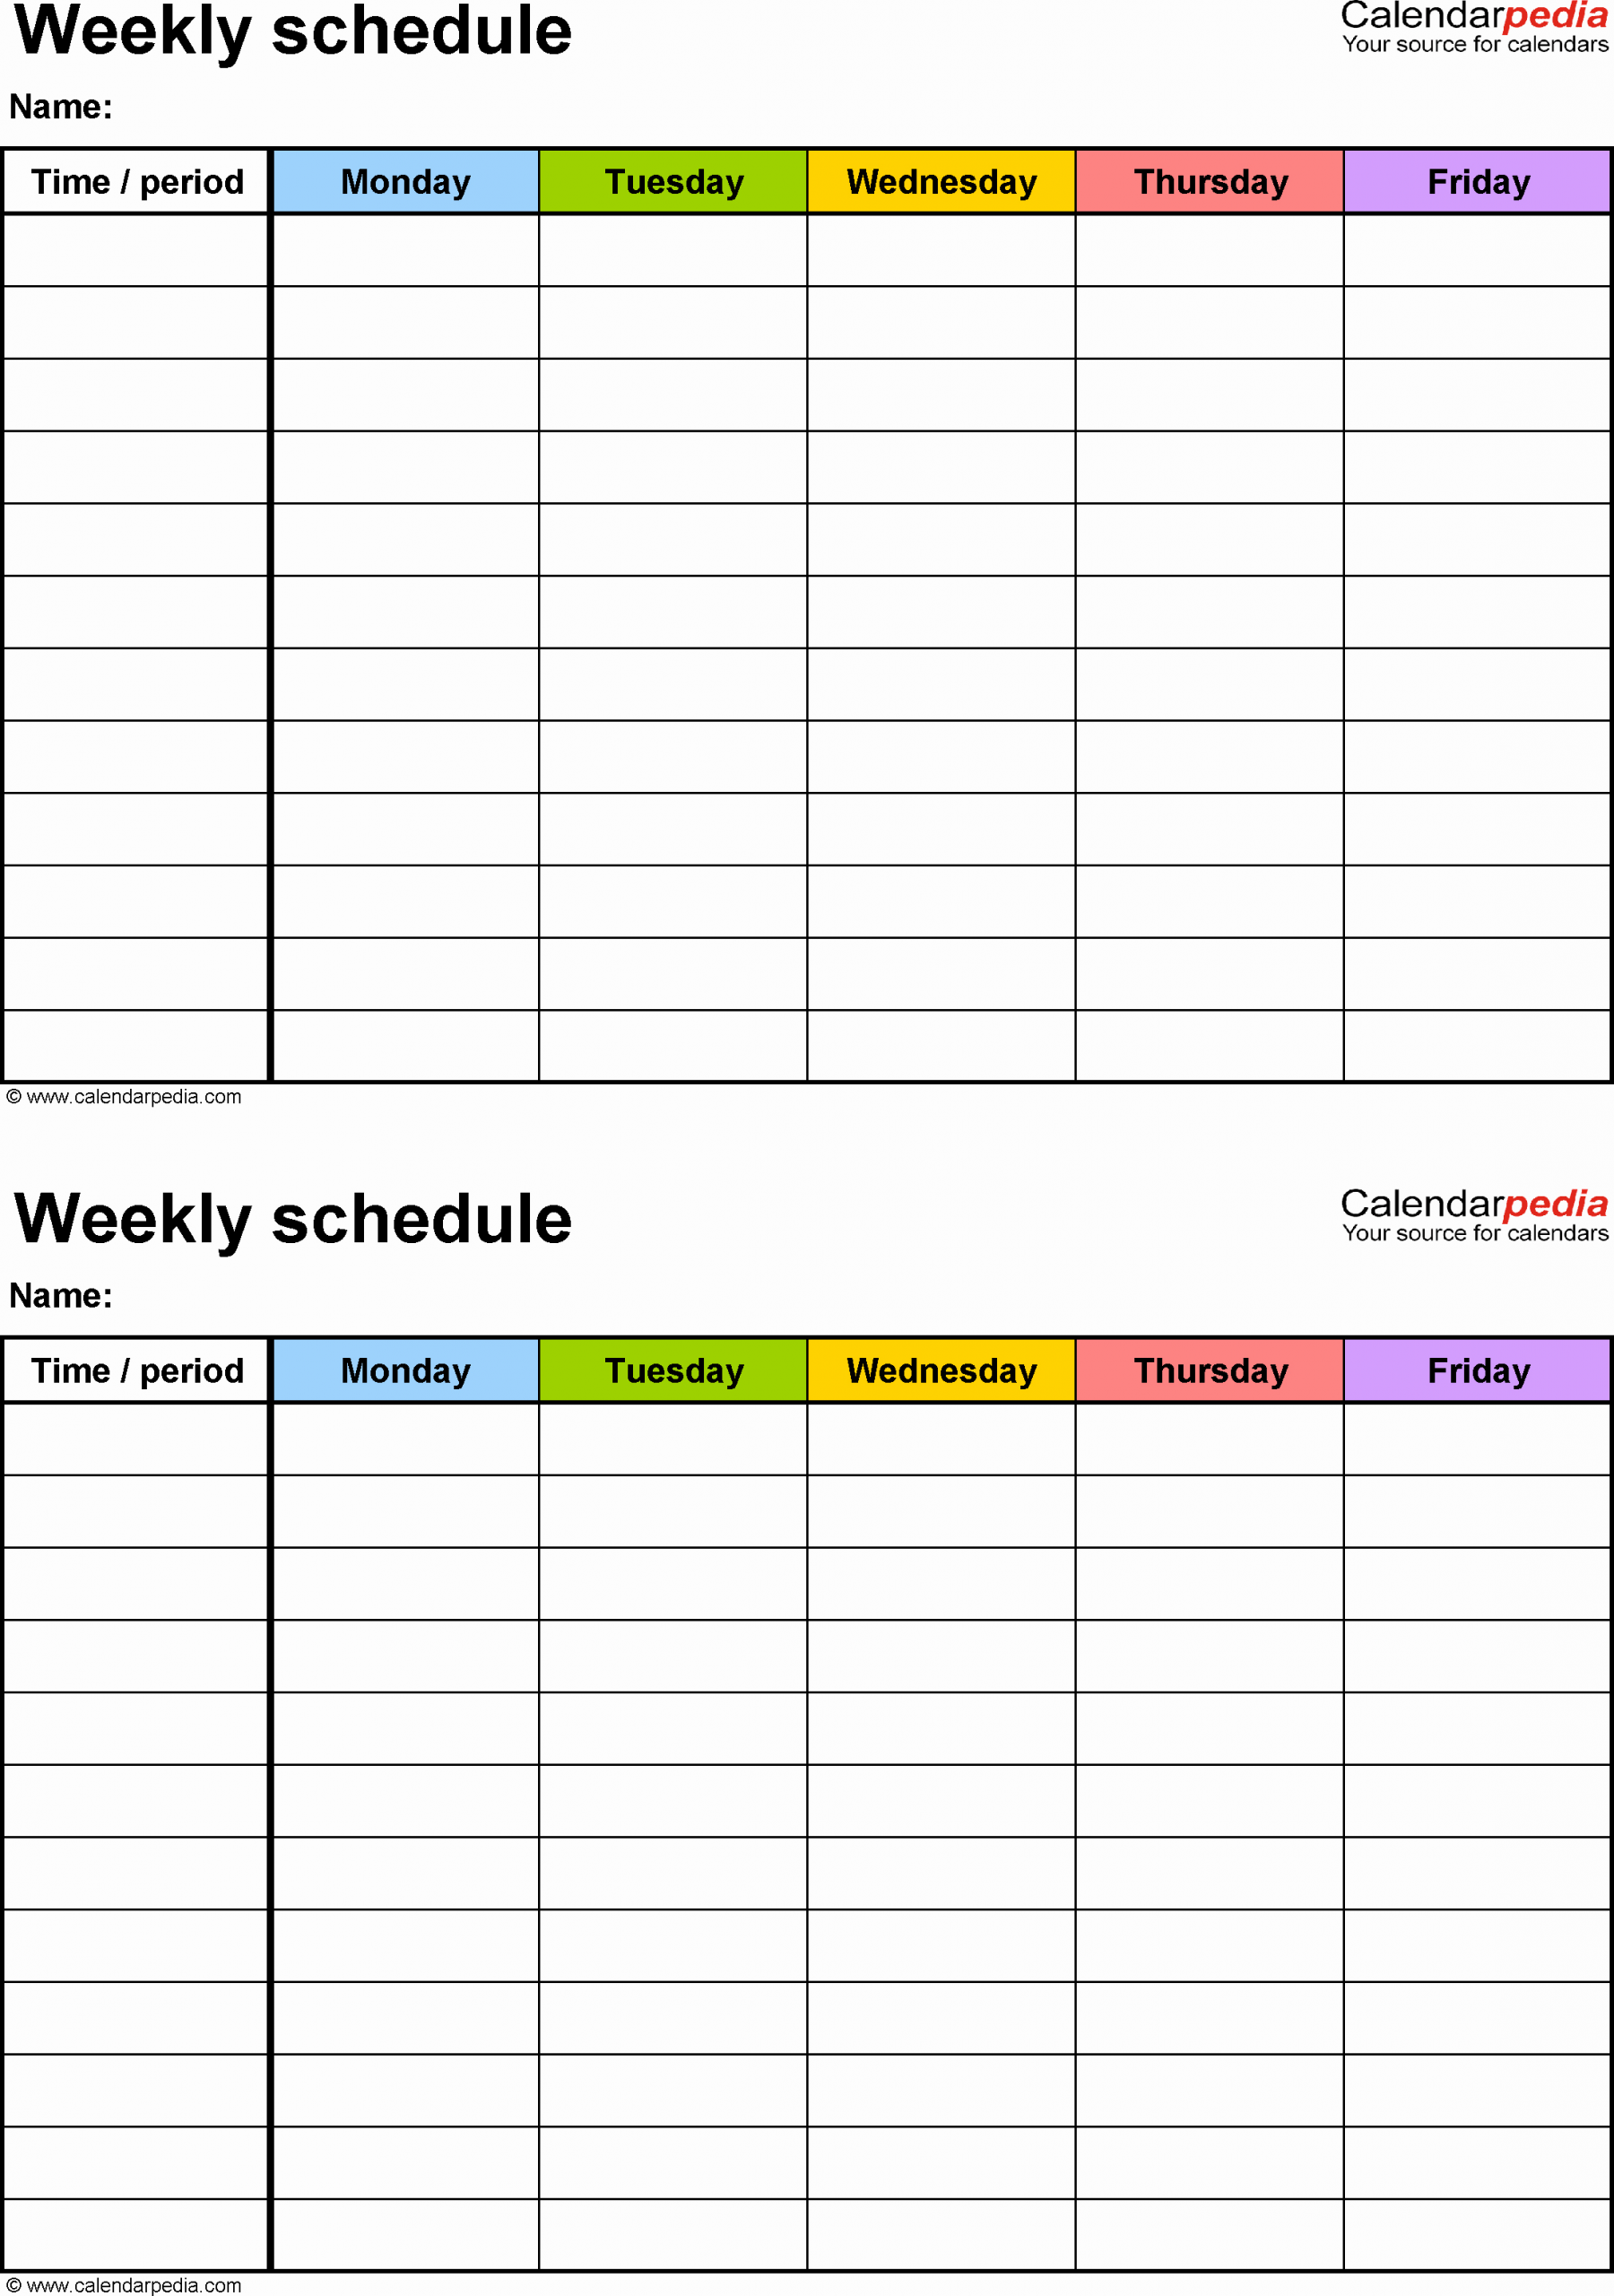 Weekly College Schedule Template Awesome Weekly Schedule Template for Pdf Version 3 2 Schedules On